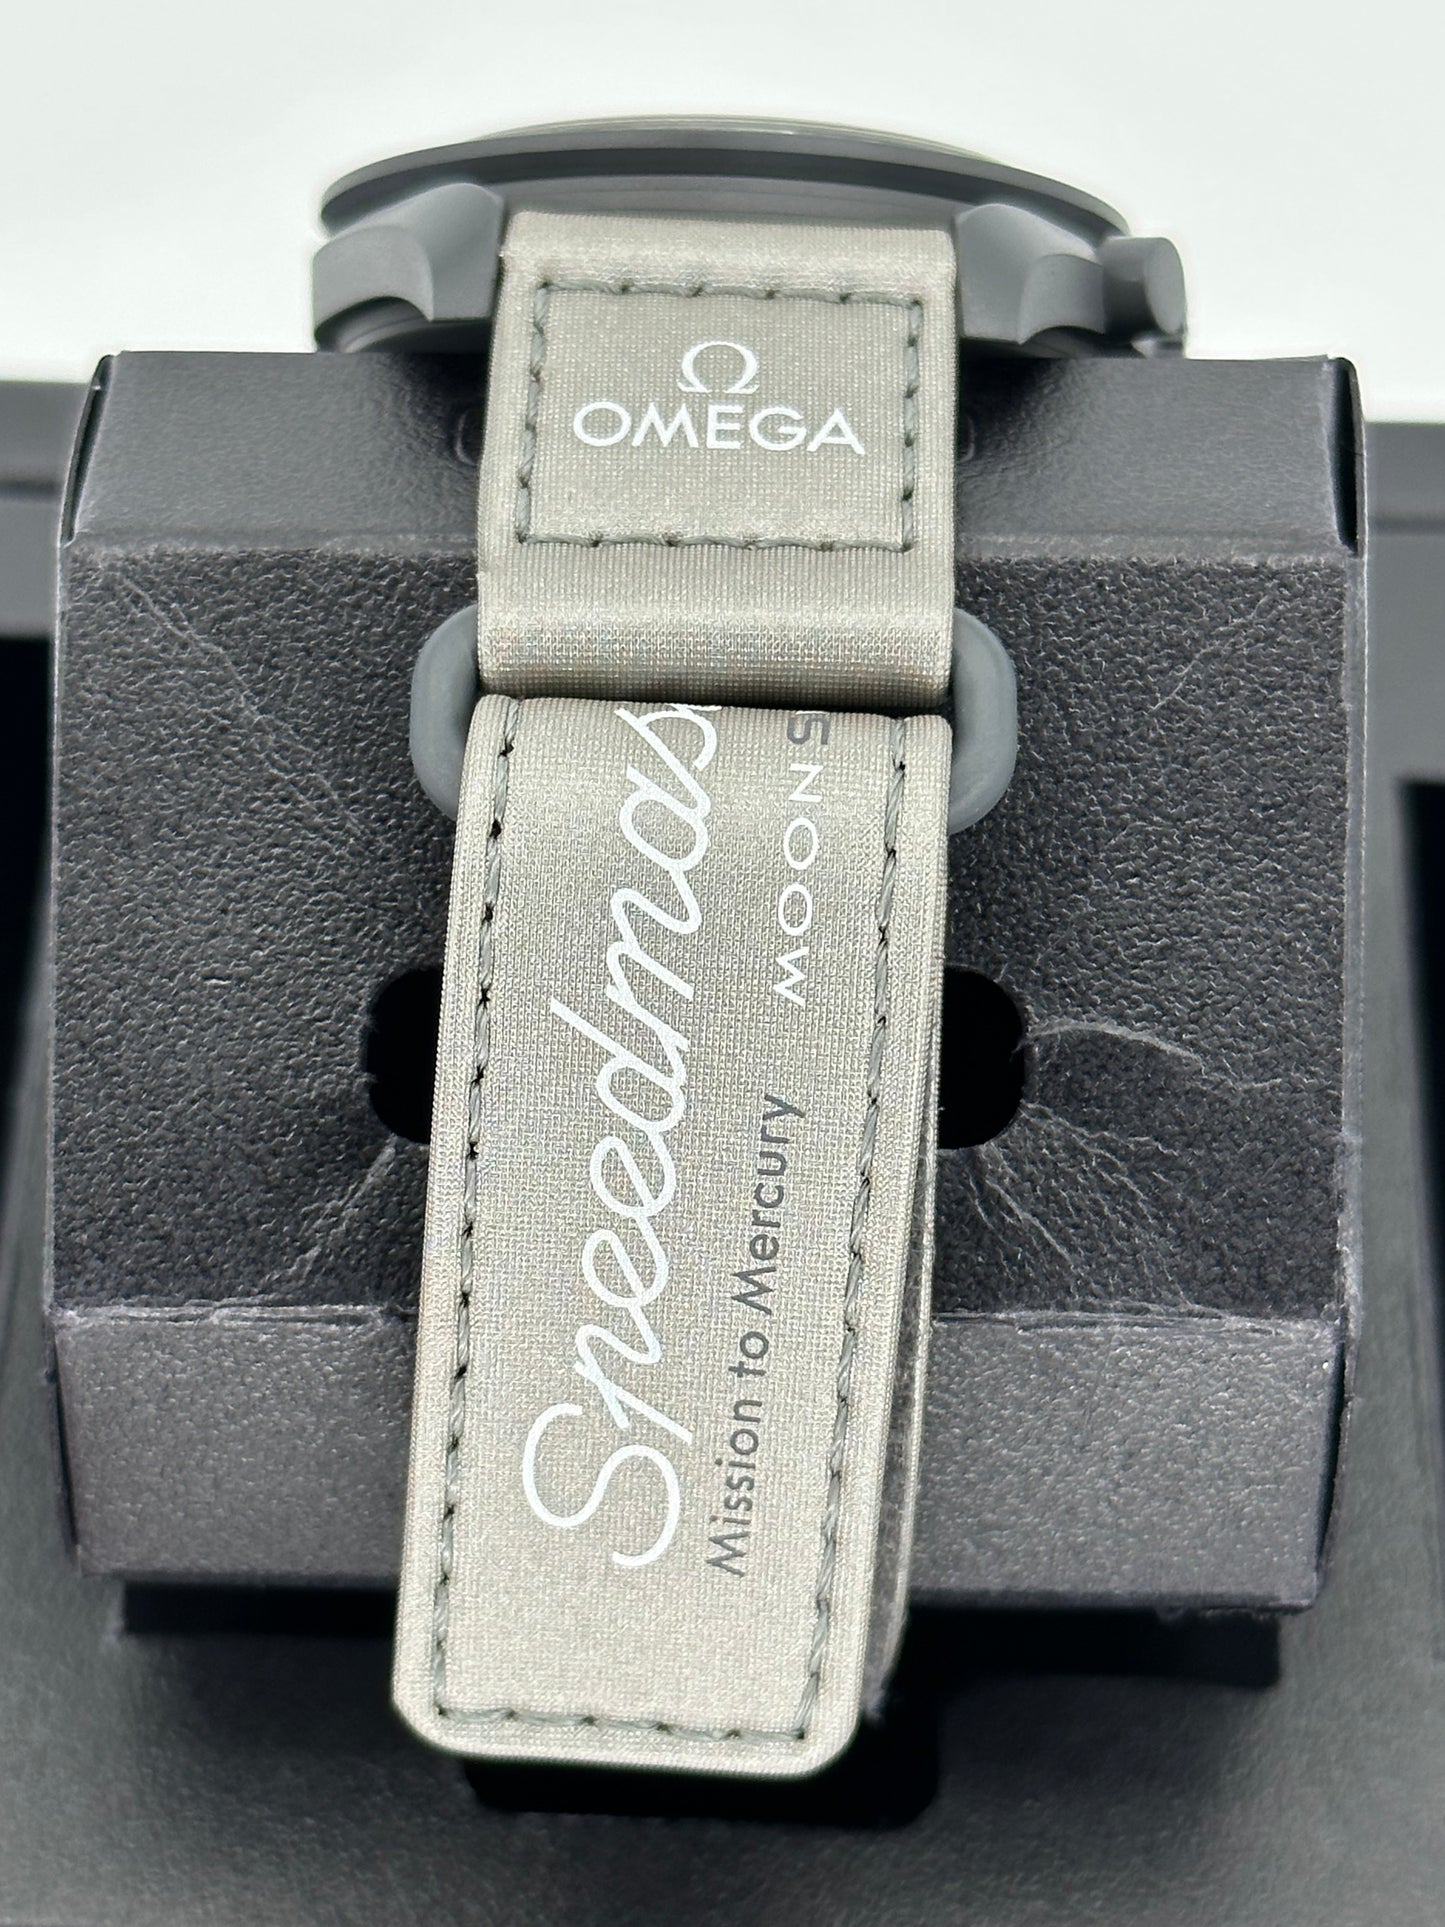 NEW Omega S033A100 Bioceramic Moon Swatch  - Mission to Mercury - MyWatchLLC